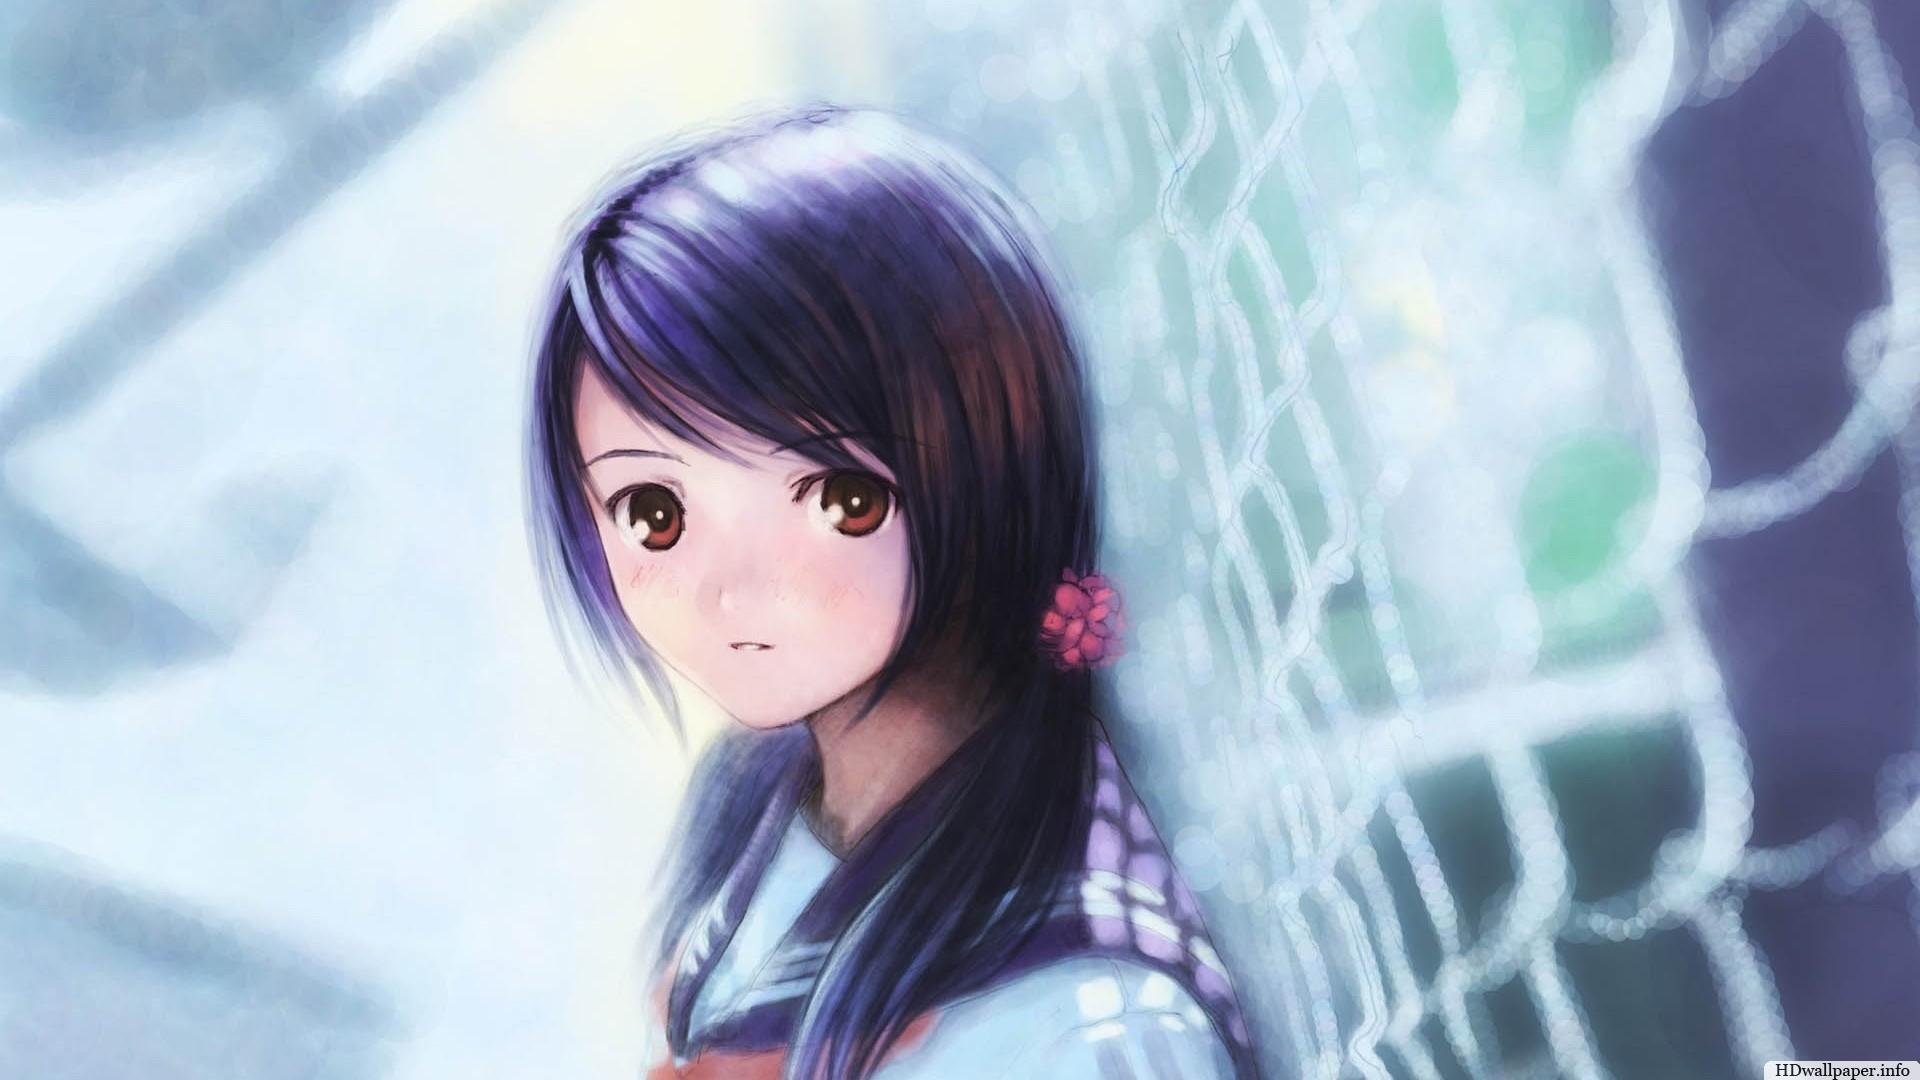 Beautiful Anime Girl Student Wallpapers Wallpaper Cave